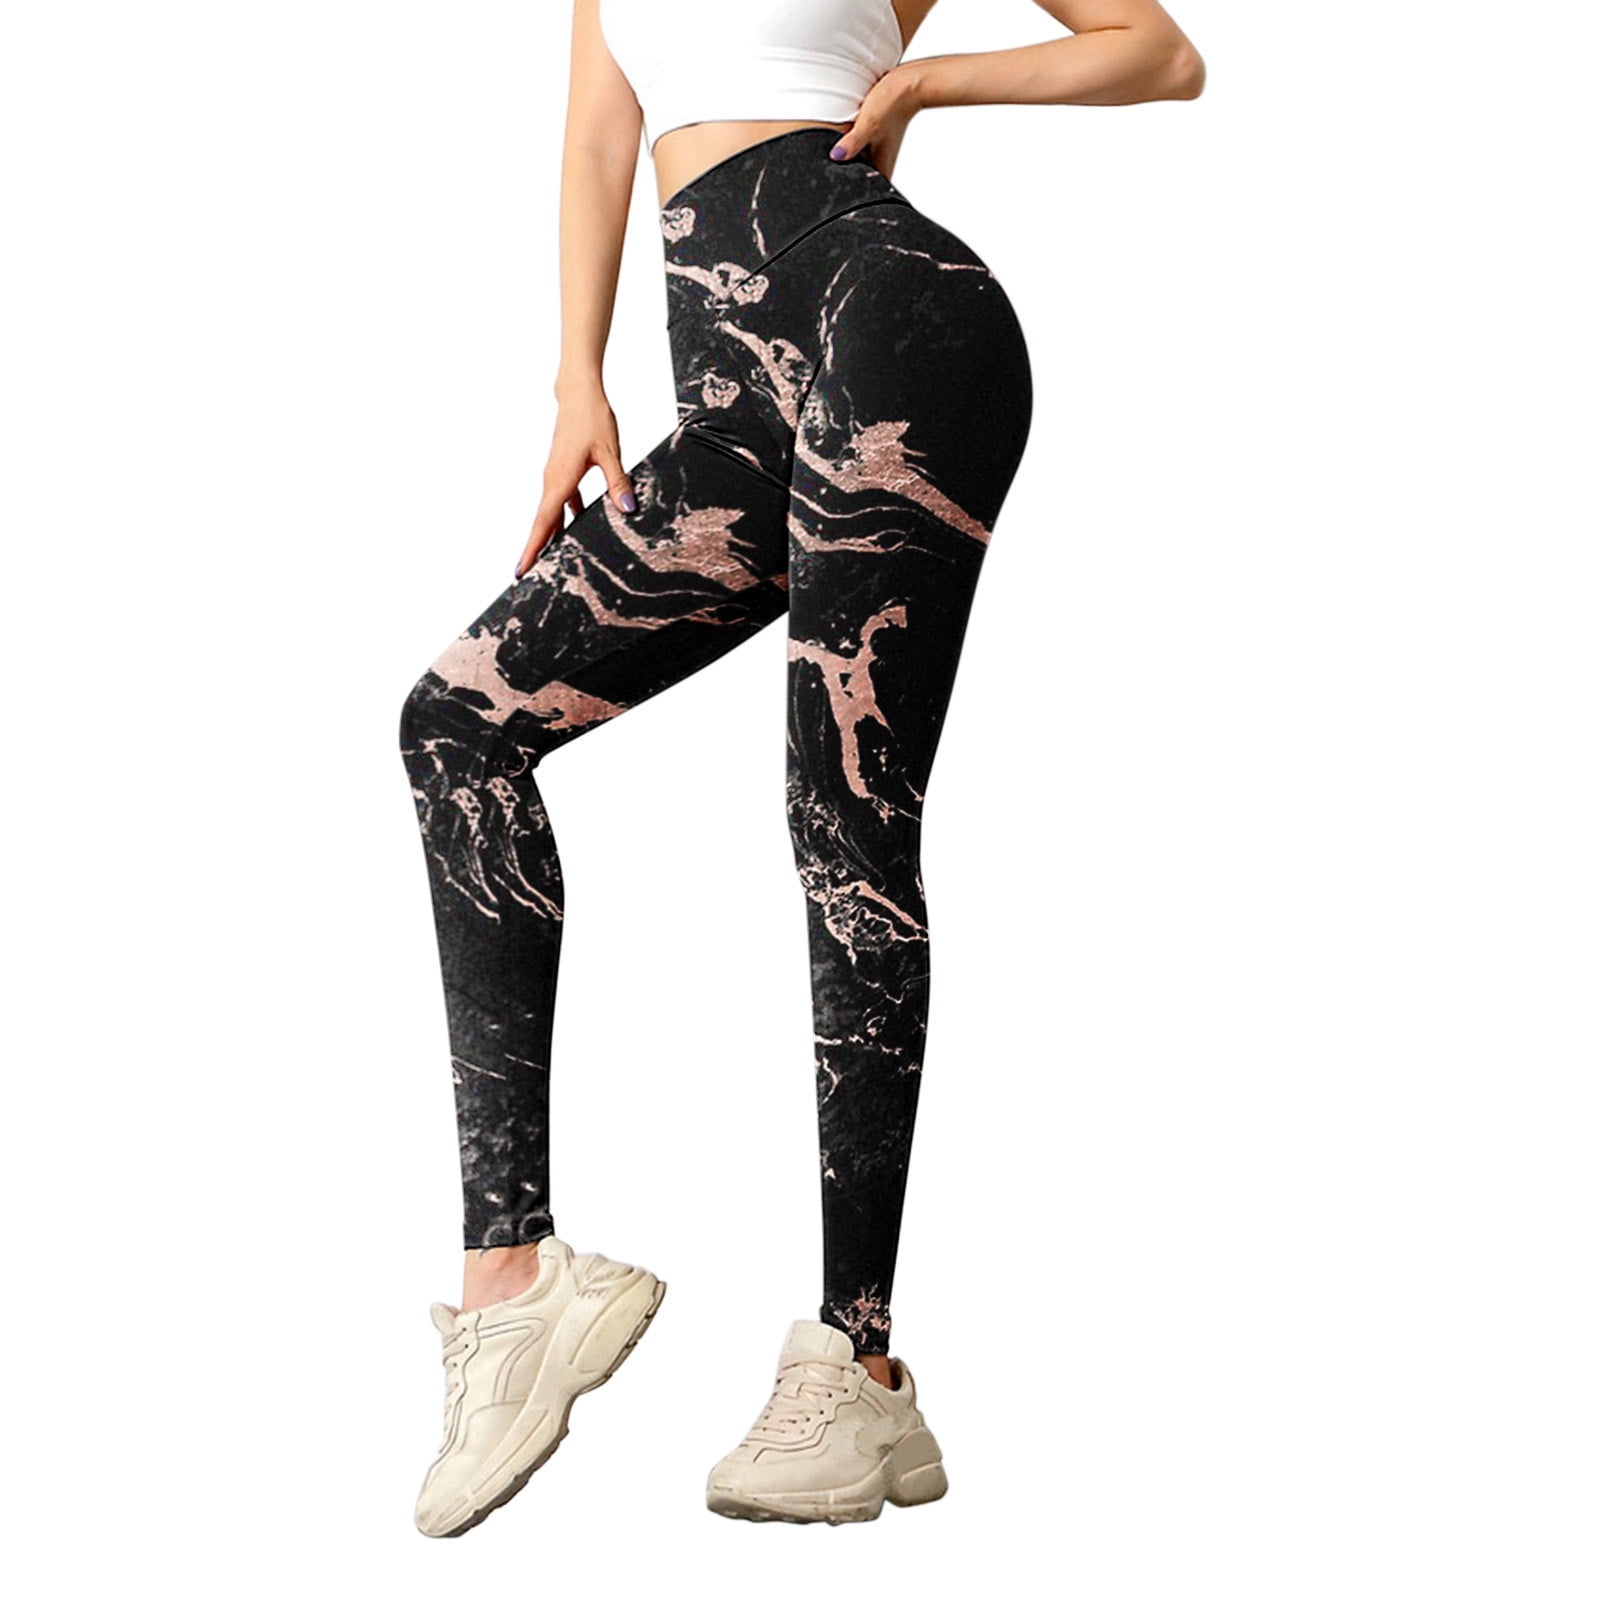  Jerdoni High Waisted Leggings for Women, Black Workout Leggings  with Pockets for Tummy Control, Buttery Soft Yoga Leggings : Clothing,  Shoes & Jewelry